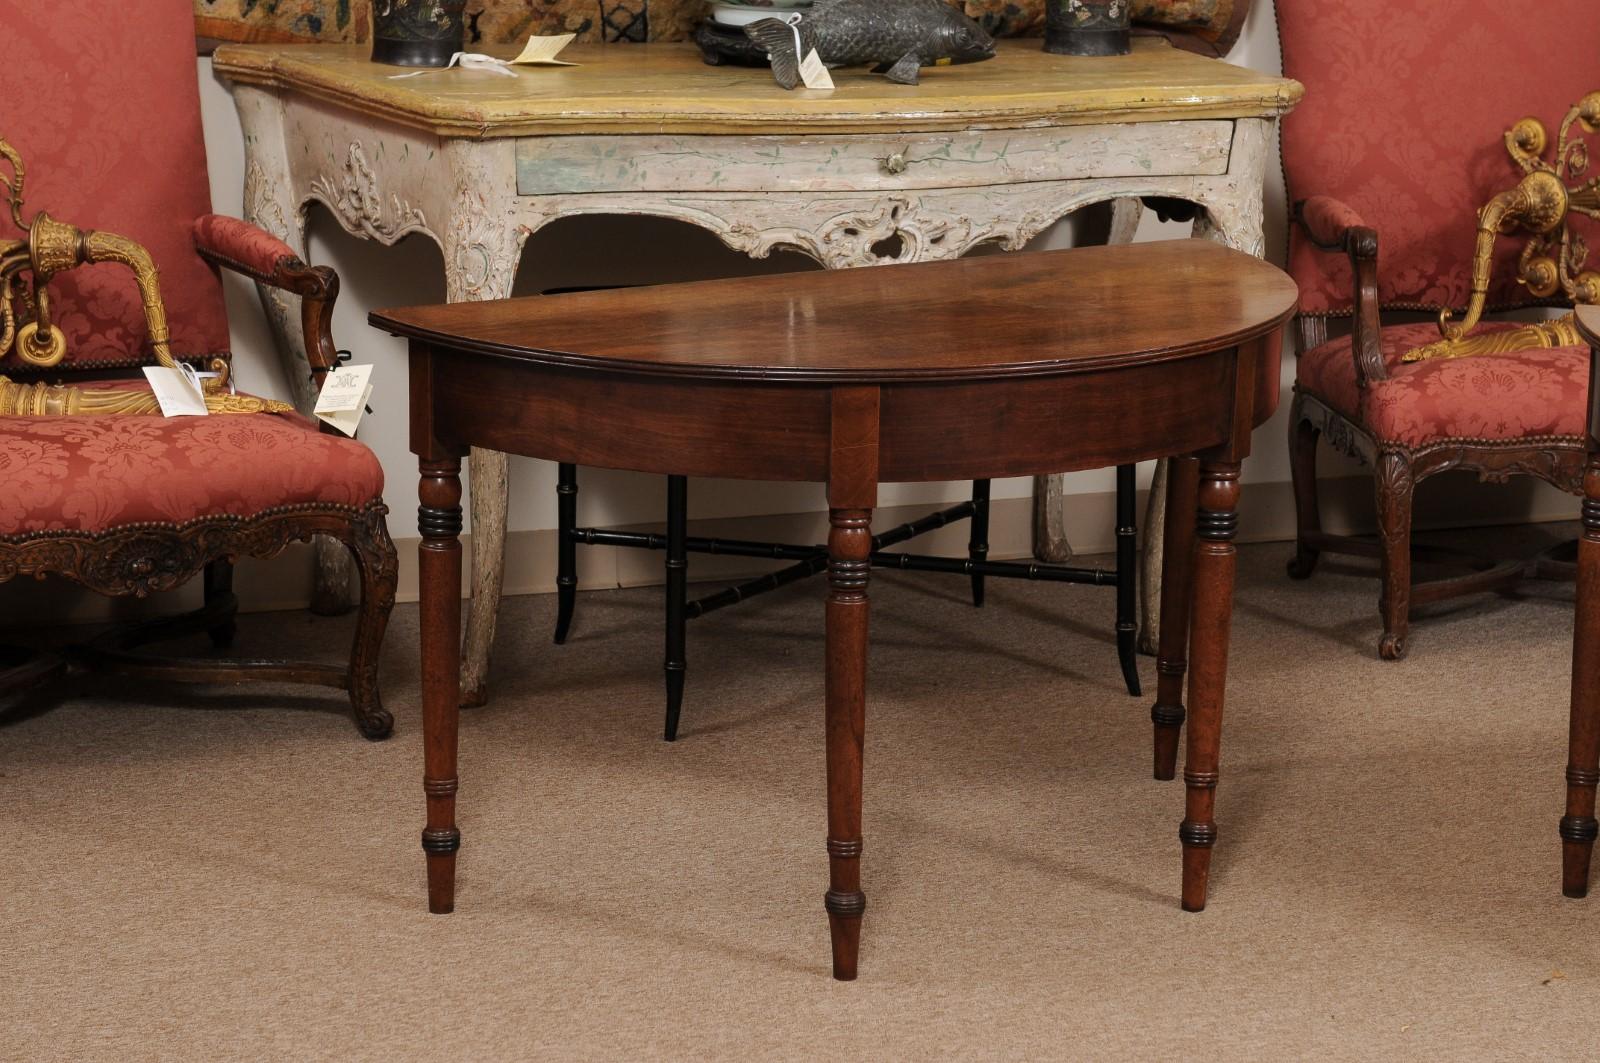  Pair of English Mahogany Demilune Console Tables with Turned Legs For Sale 5